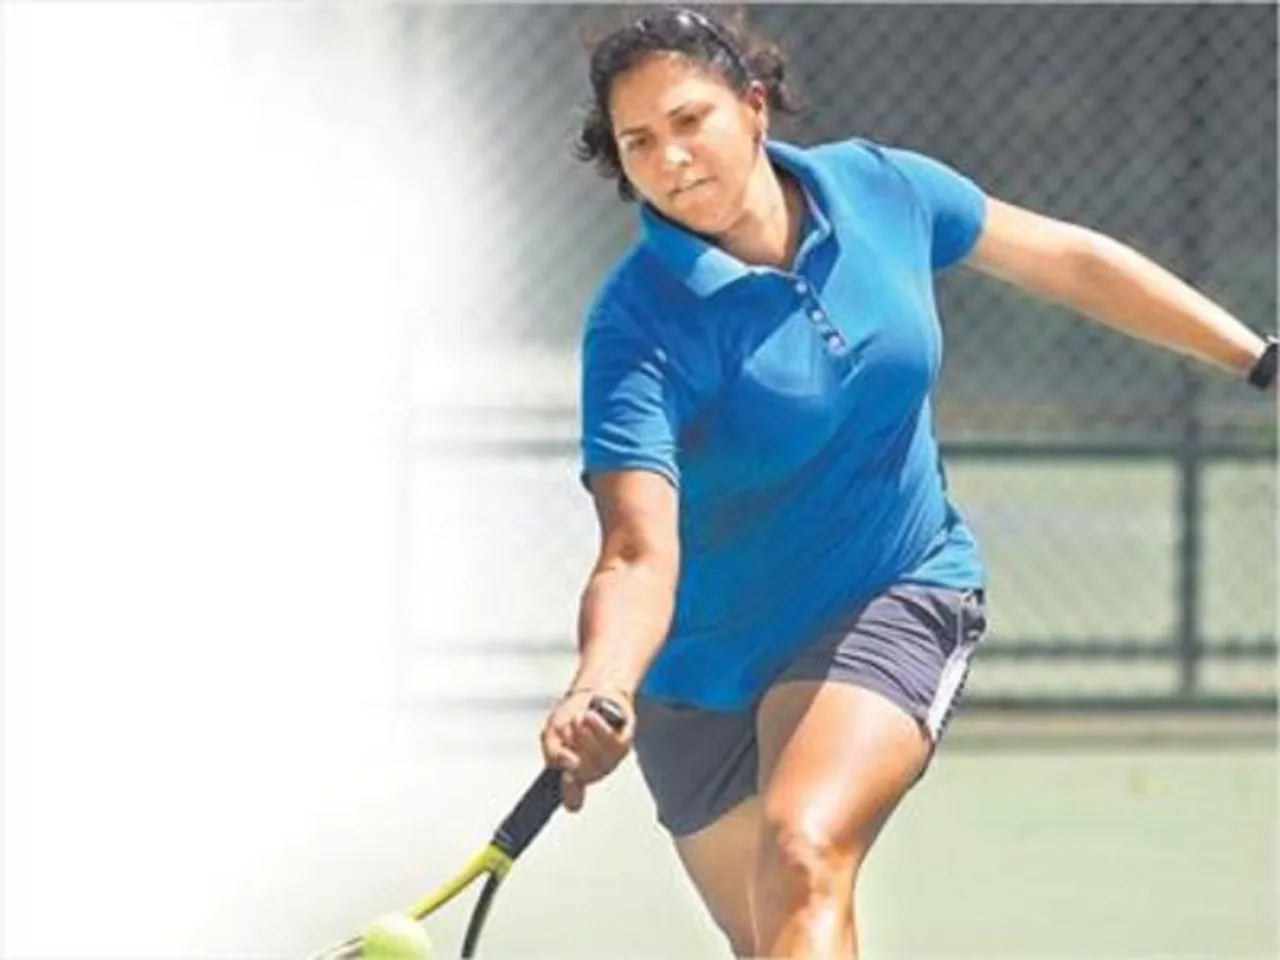 Let’s take a second to remember India’s first woman grand slam winner: Nirupama Sanjeev